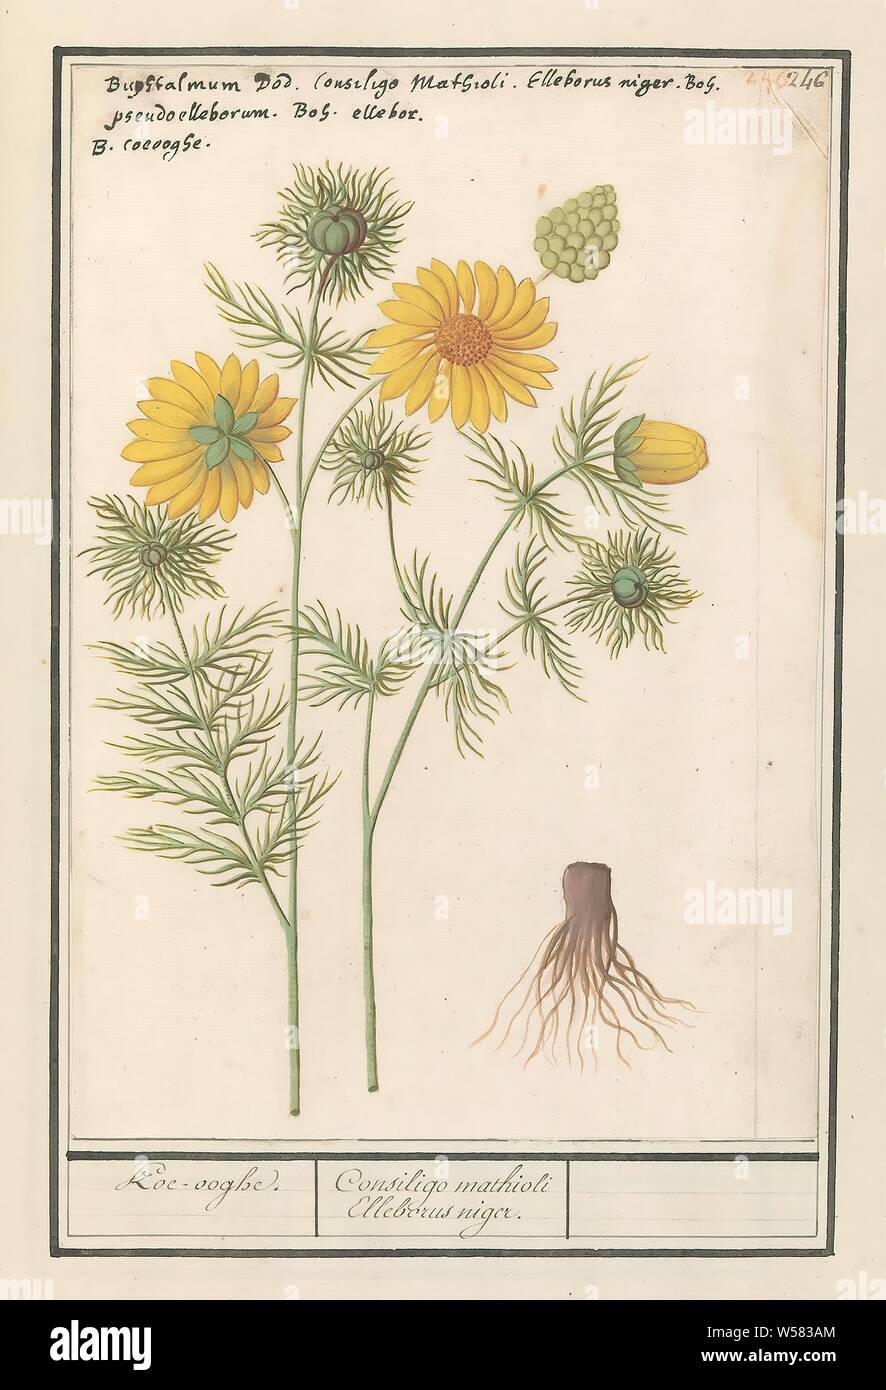 Spring Adonis (Adonis vernalis) Cow-eye. / Consiligo mathioli Elleborus niger. (title on object), Spring Adonis. Numbered top right: 246. Top left the name in Latin and Dutch. Part of the third album with drawings of flowers and plants. Tenth of twelve albums with drawings of animals, birds and plants known around 1600, commissioned by Emperor Rudolf II. With explanations in Dutch, Latin and French., Anselmus Boetius de Boodt, 1596 - 1610, paper, watercolor (paint), deck paint, chalk, ink, pen, h 264 mm × w 184 mm Stock Photo